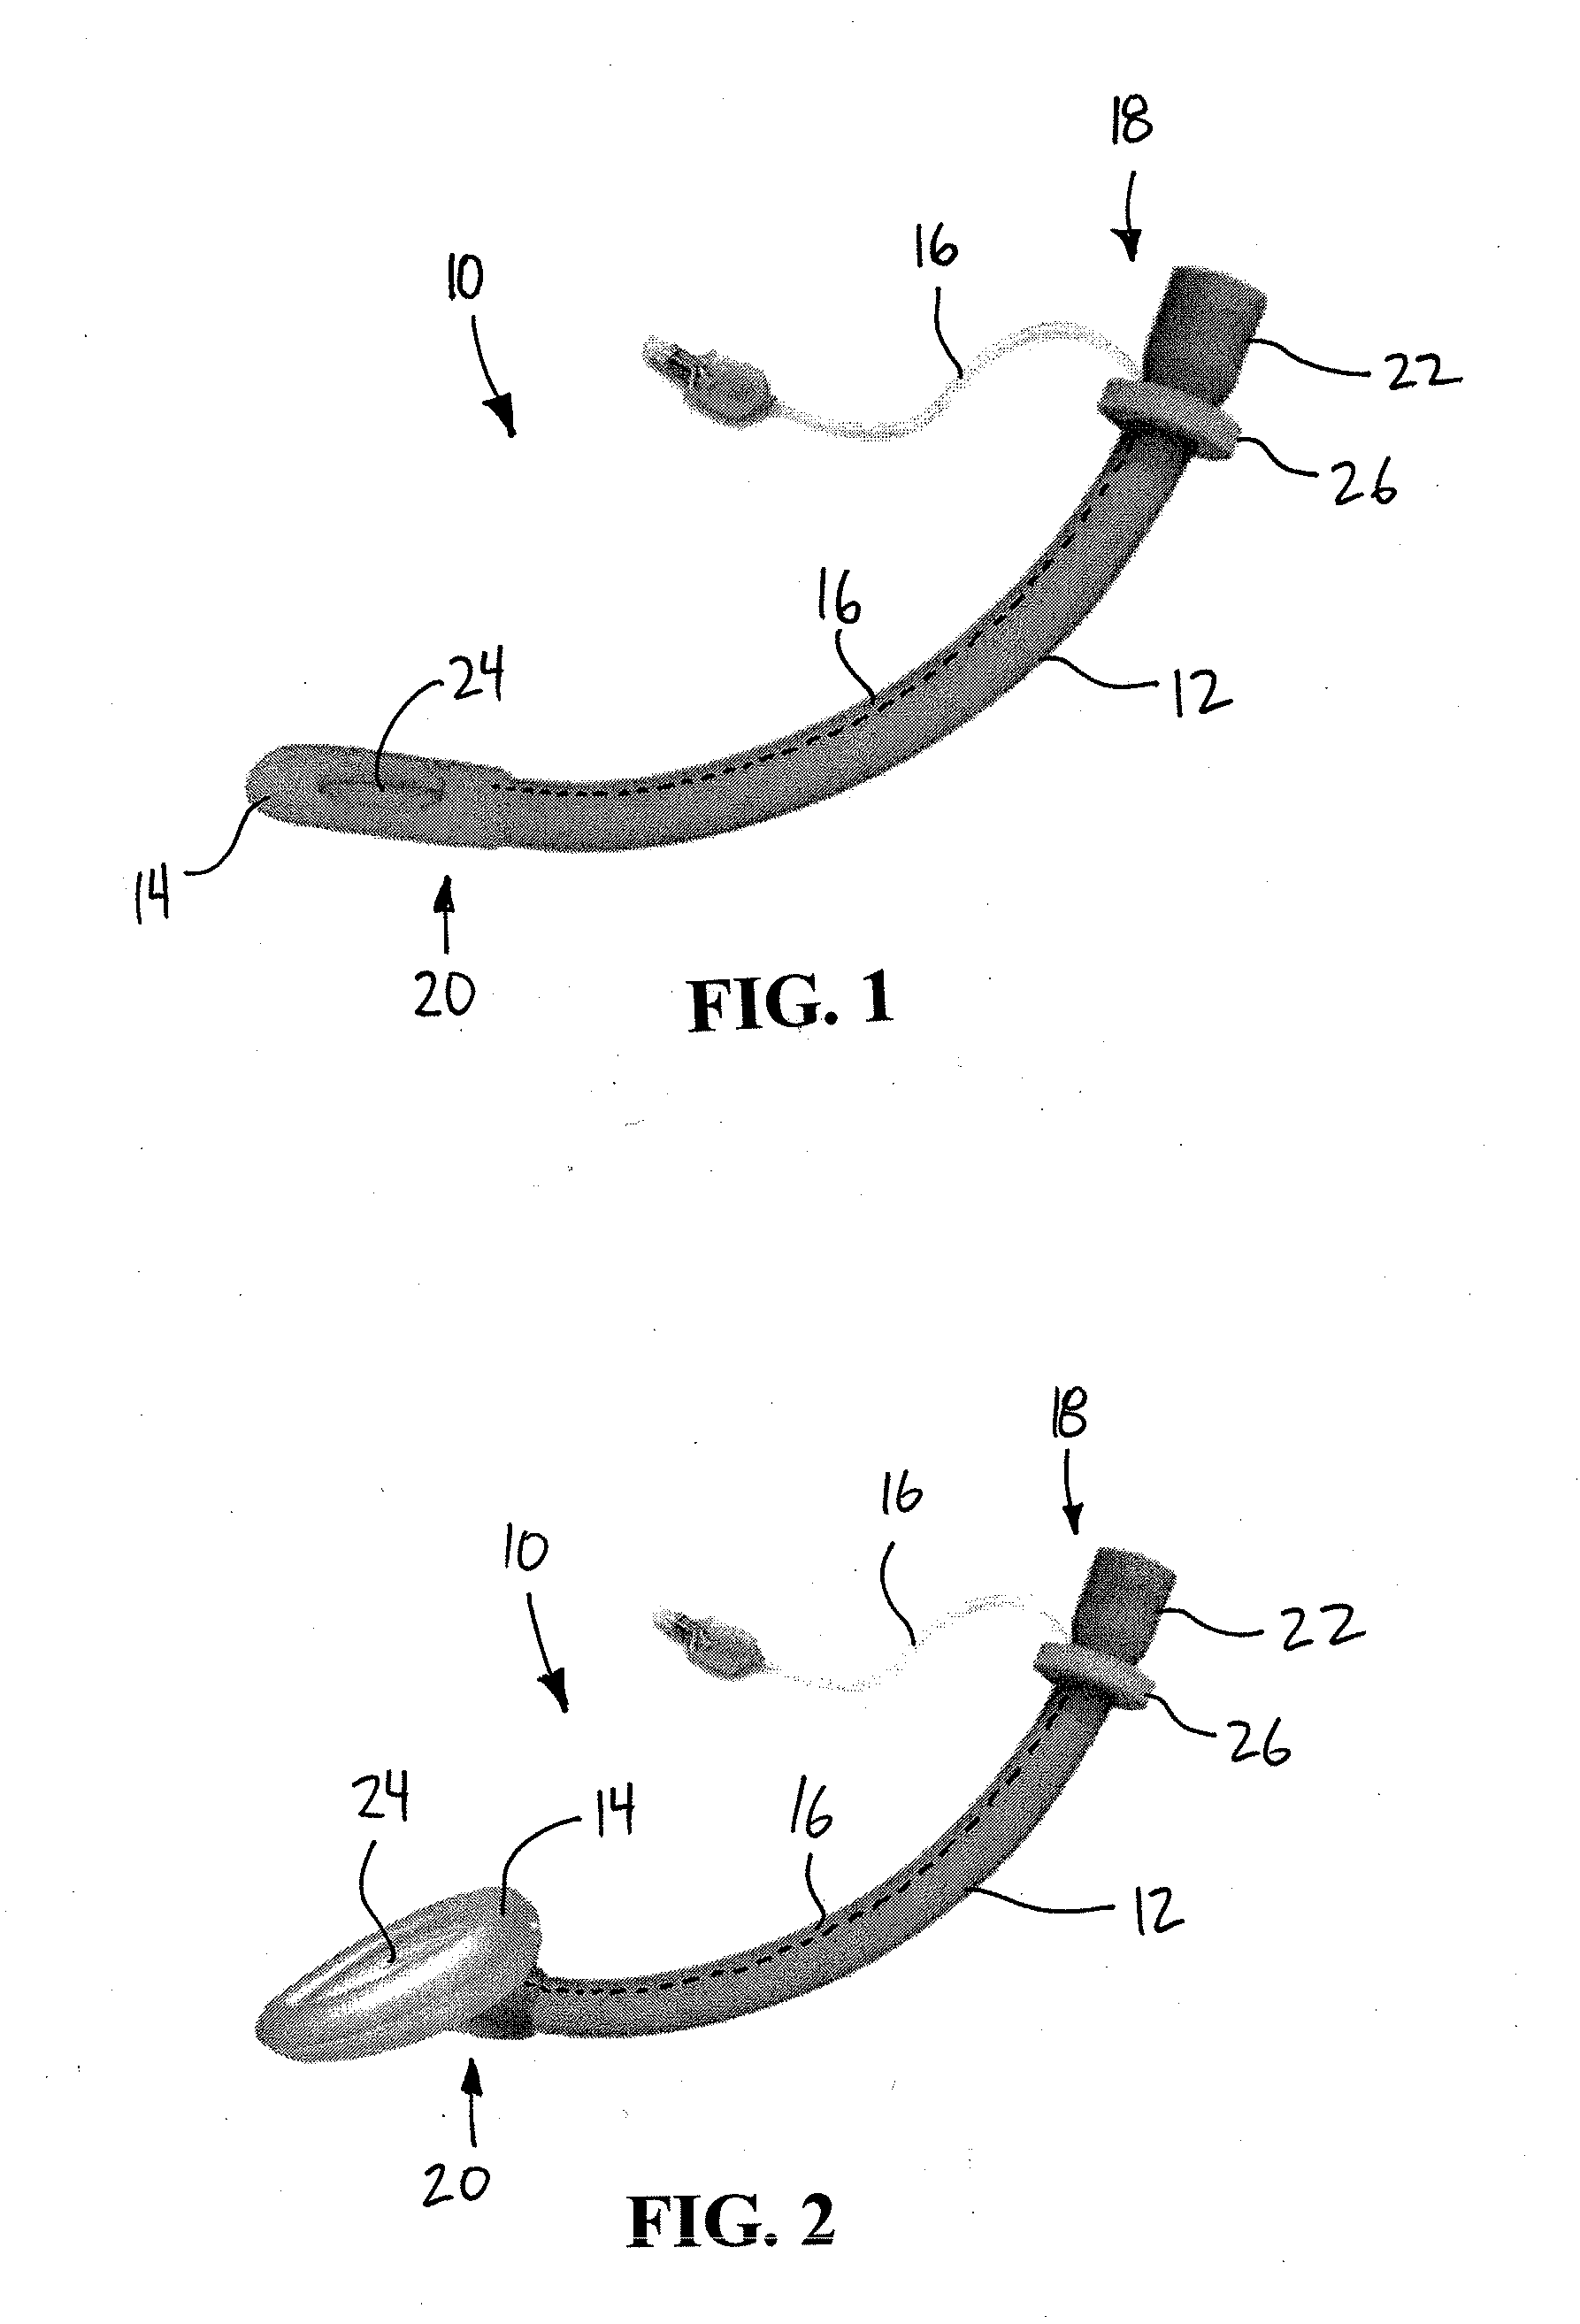 Nasal airway management device with inflatable supraglottic laryngeal cuff